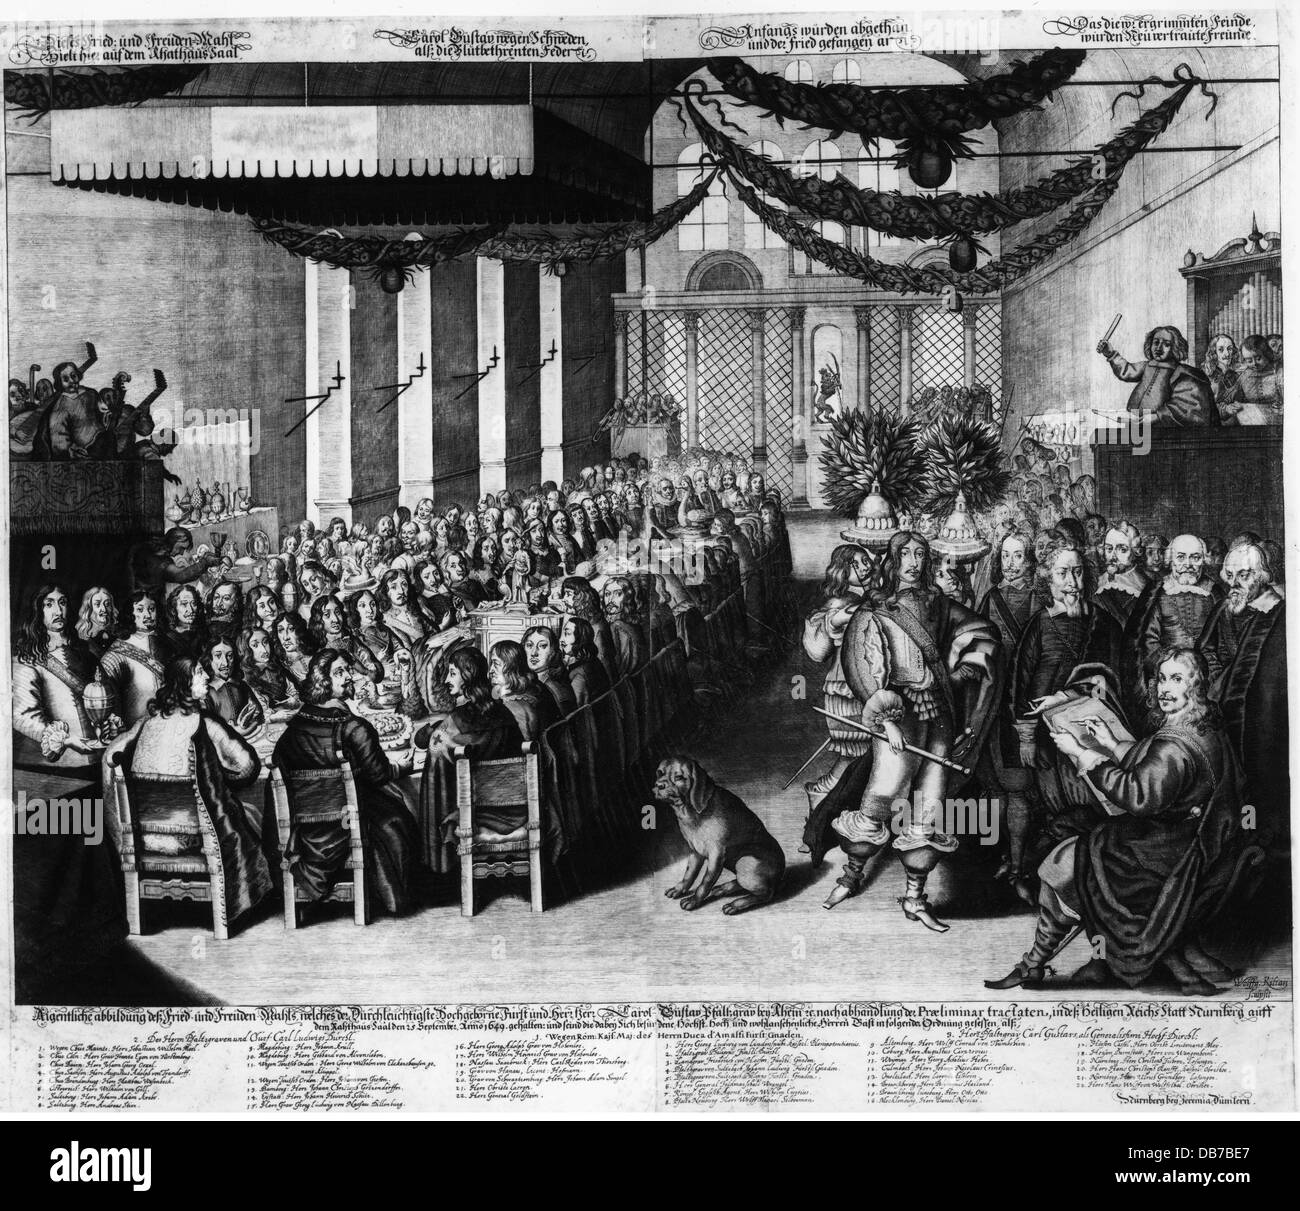 Thirty Years War 1618 - 1648, peace dinner of the elector Karl Gustav of the Palatinate at the Nuremberg city hall, 25.9.1649, copper engraving, by Wolfgang Kilian (1581 - 1663), 1651, 17th century, graphic, graphics, Germany, Nuremberg, celebration, banquet meal, banquets, celebratory banquet, hall, halls, dinner table, dinner tables, chairs, chair, sitting, sit, dinner, eating, eat, standing, drawer, drawers, drawing, sketching, draw, sketch, artist, artists, dog, dogs, ceremony, ceremonies, quietude, peace and quiet, conclusion of peace, peace agree, Artist's Copyright has not to be cleared Stock Photo